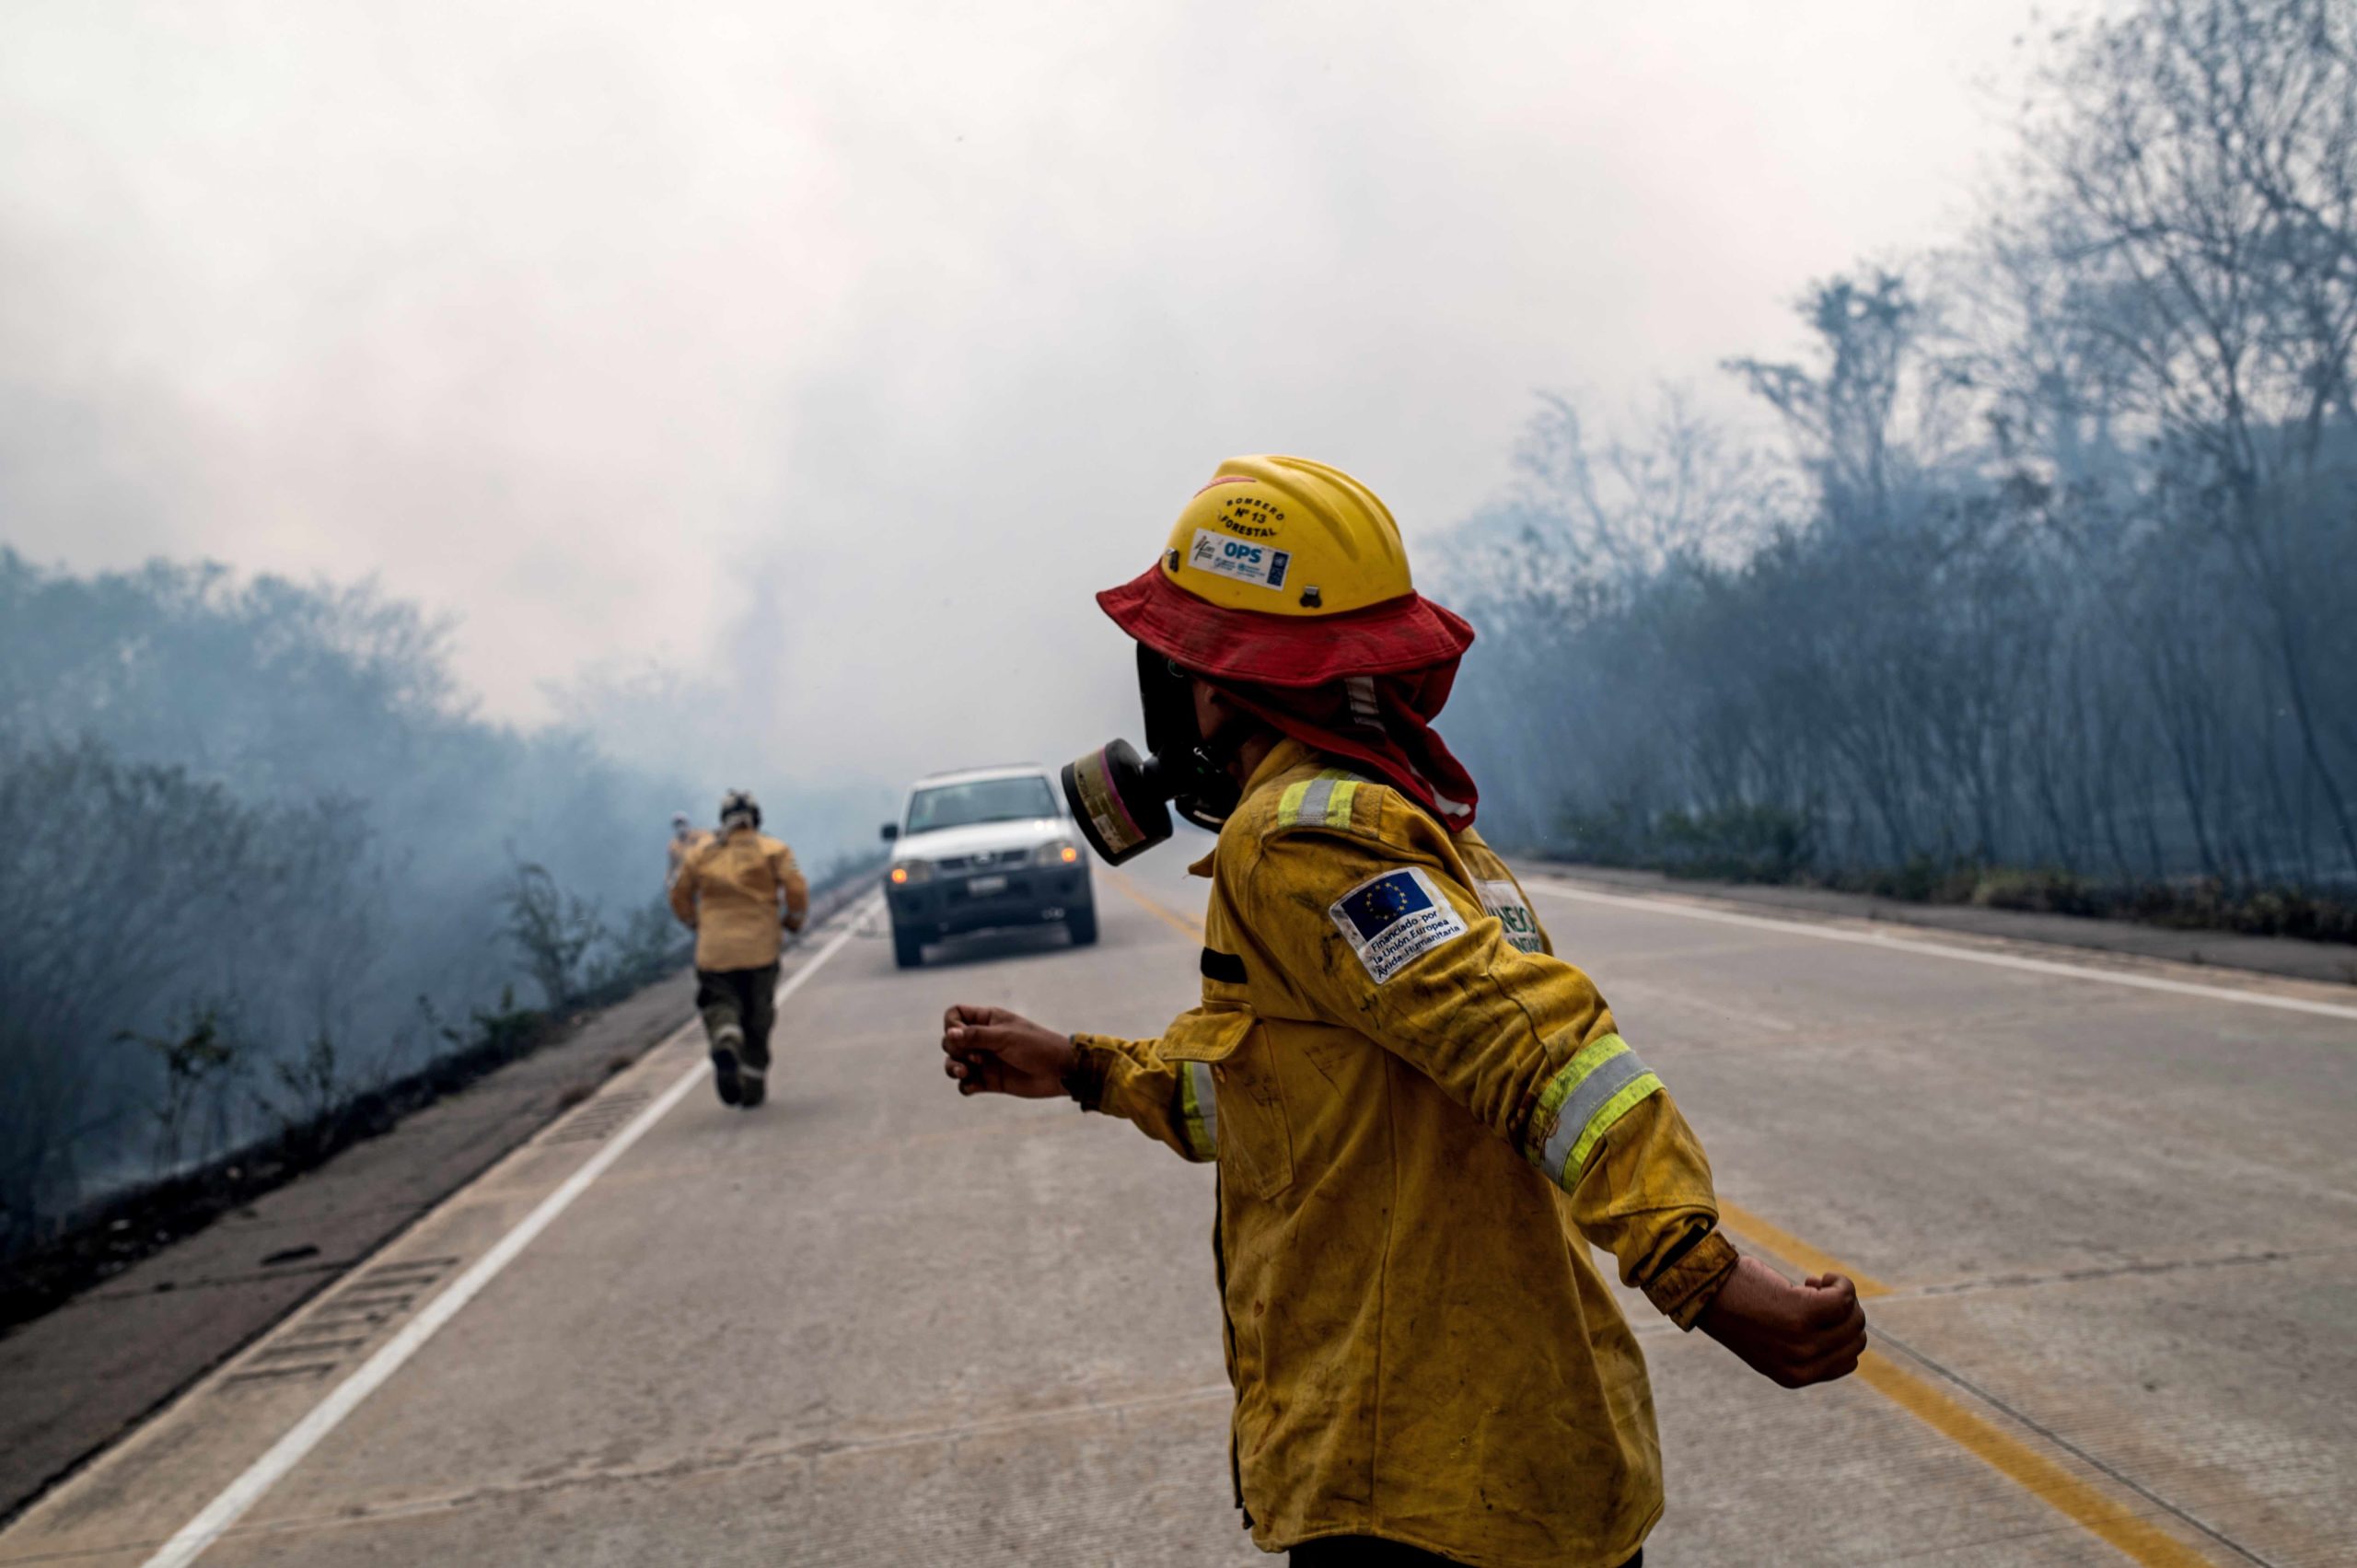 Firefighters race to stop a fire advancing along a highway in southern Bolivia's Chiquitania region. Image by Claudia Belaunde.